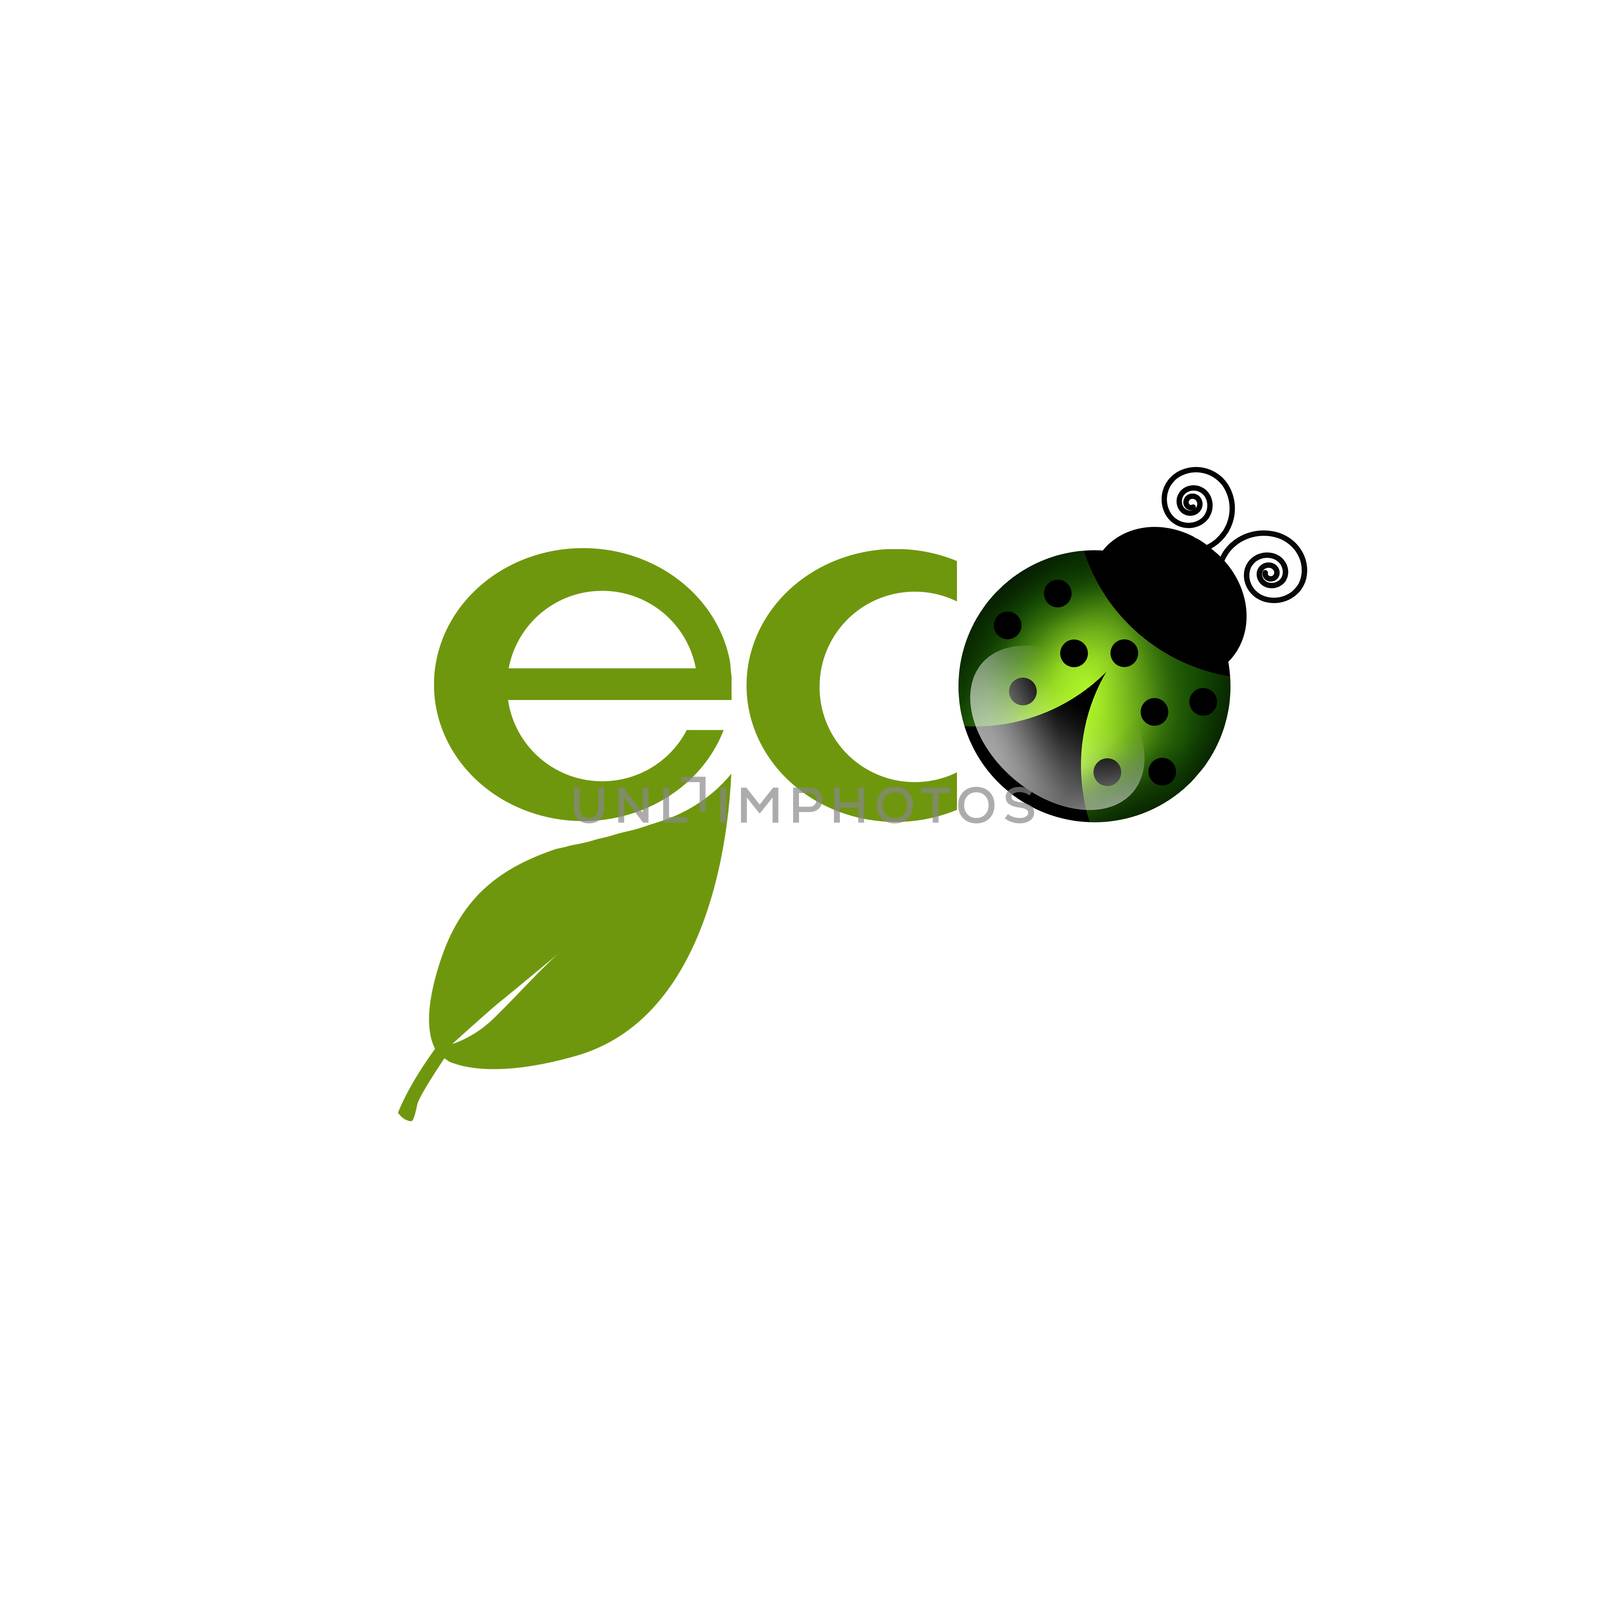 eco logo in a white background